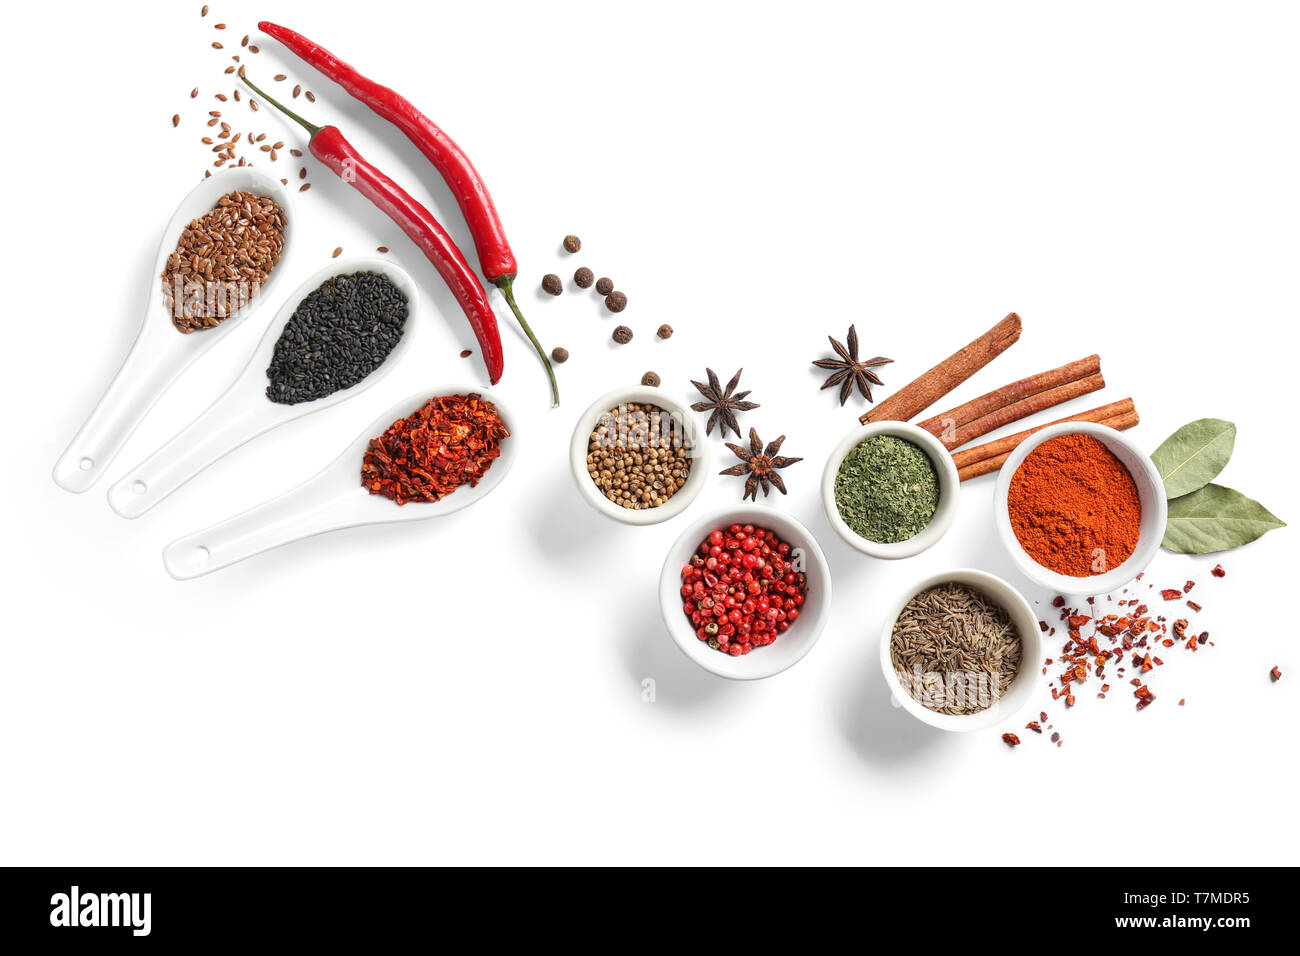 Composition with various spices on white background Stock Photo - Alamy